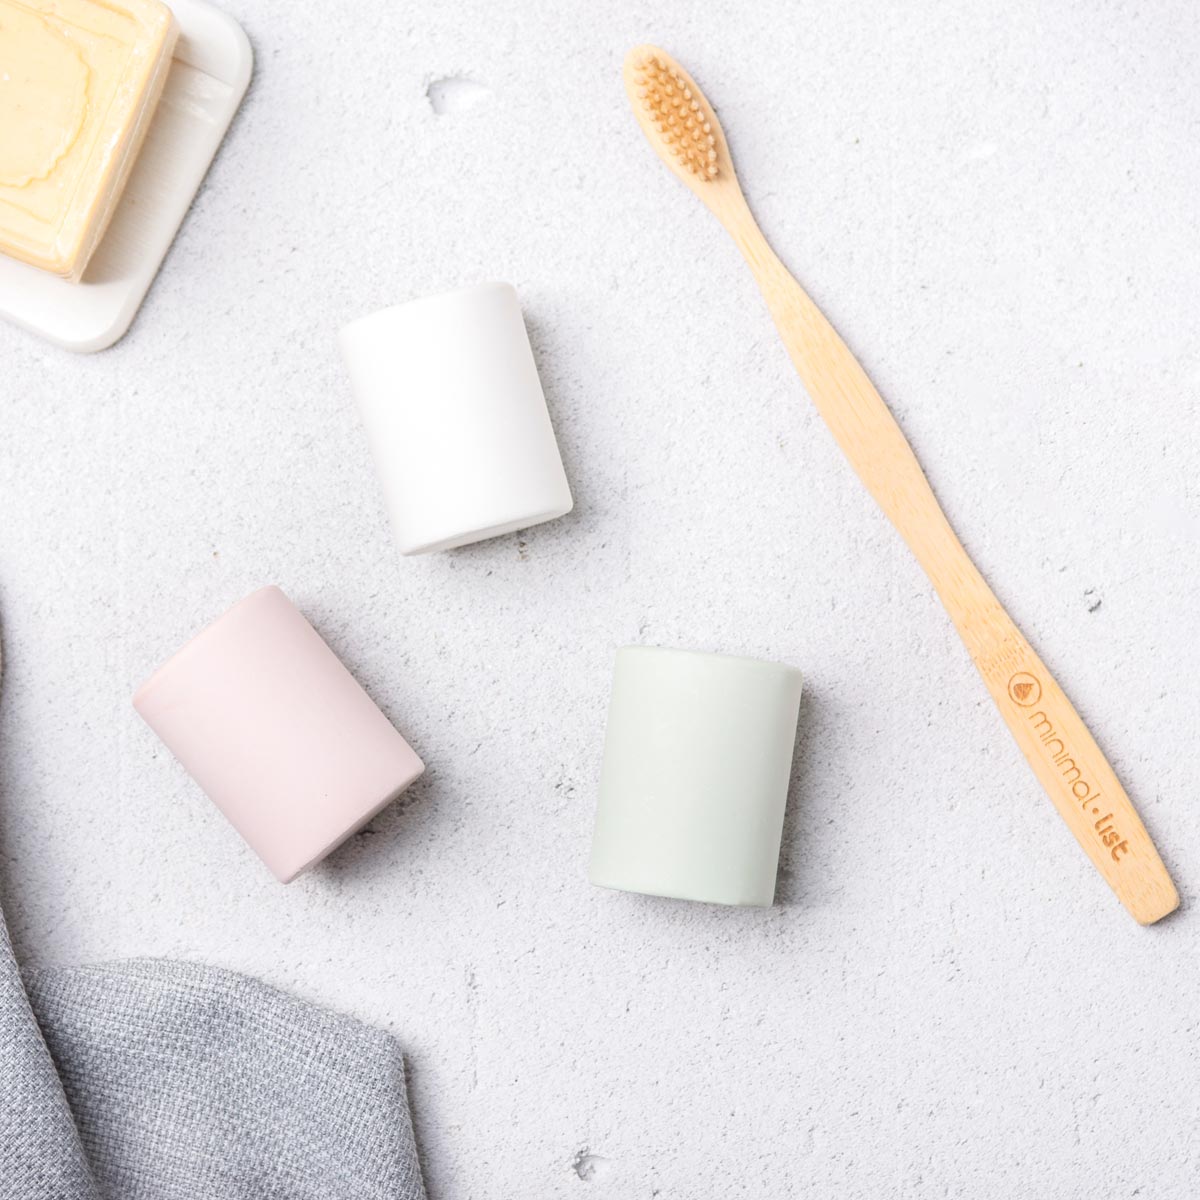 Minimal List Toothbrush Holder from Diatomite and Zeolite